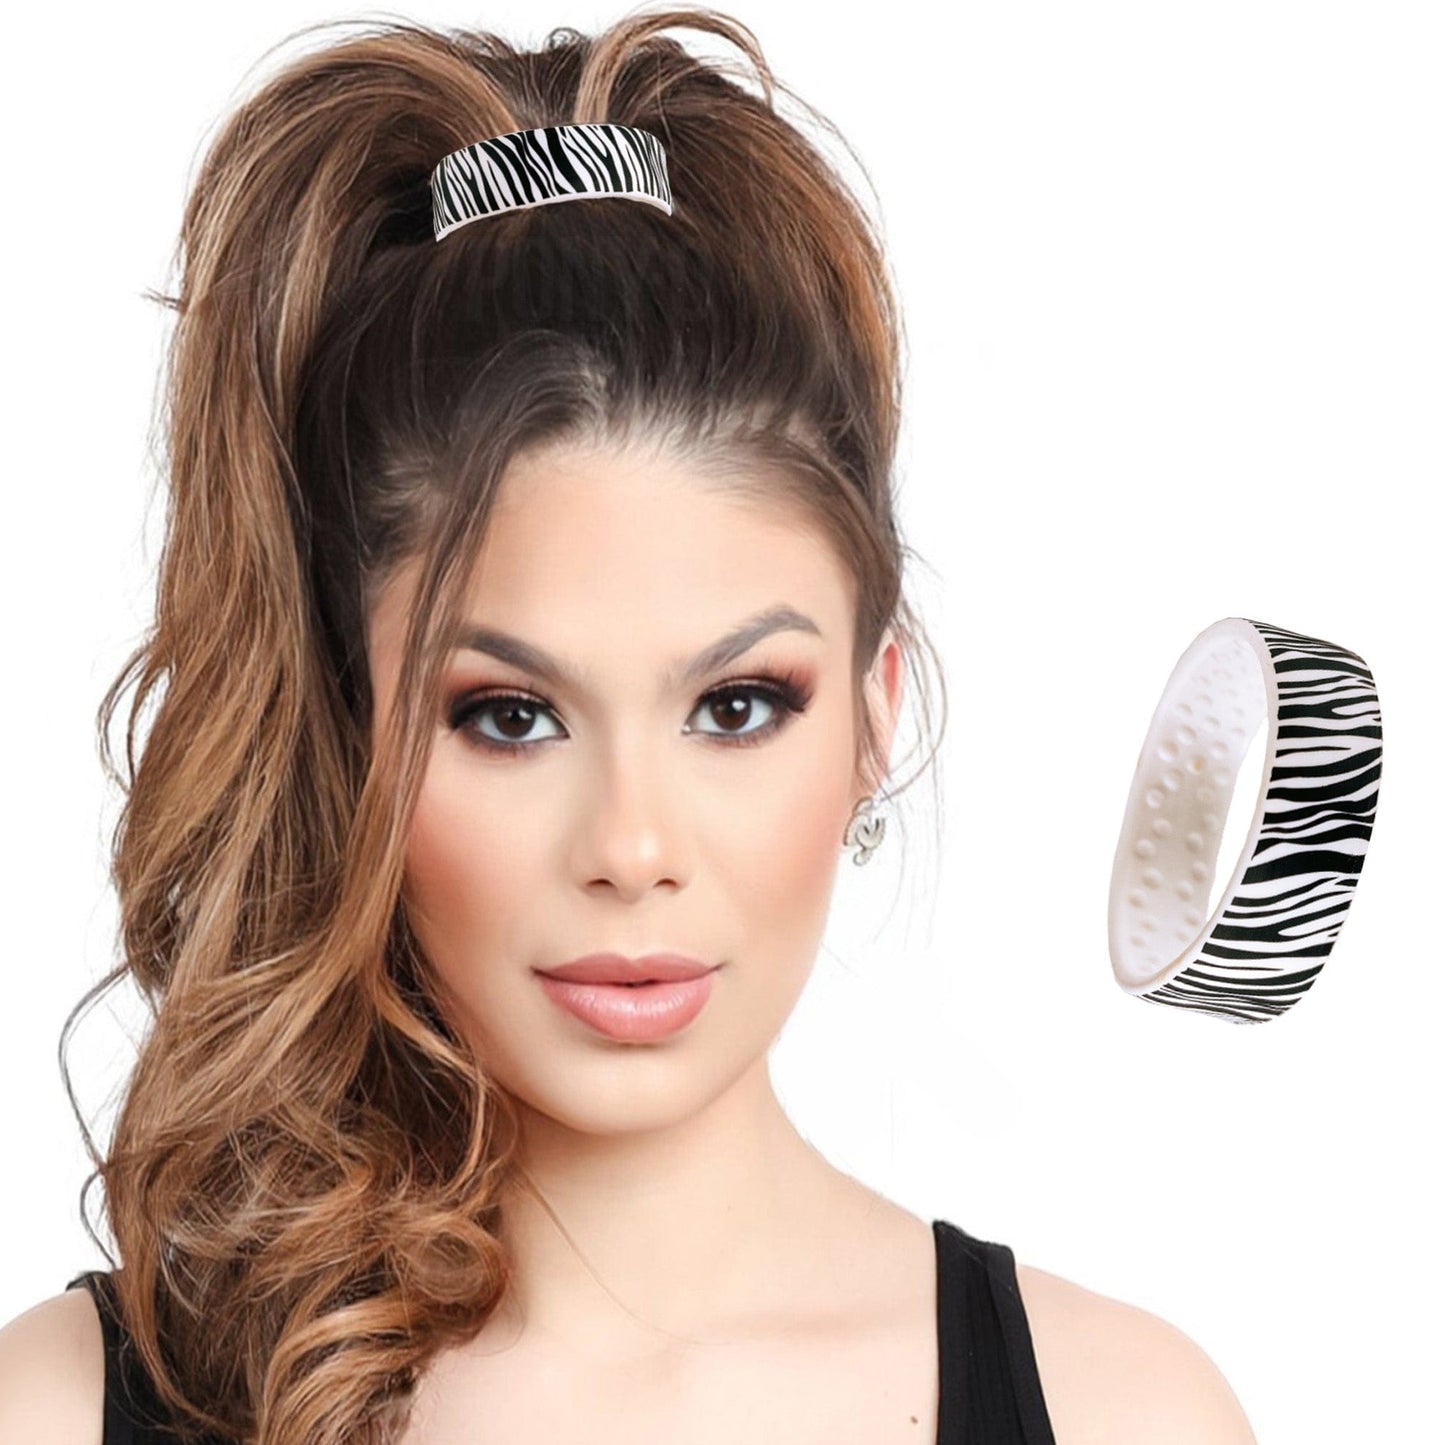 Zebra Limited Edition Designer PONY-O. This larger size is perfect for ponytails and all-up styles.